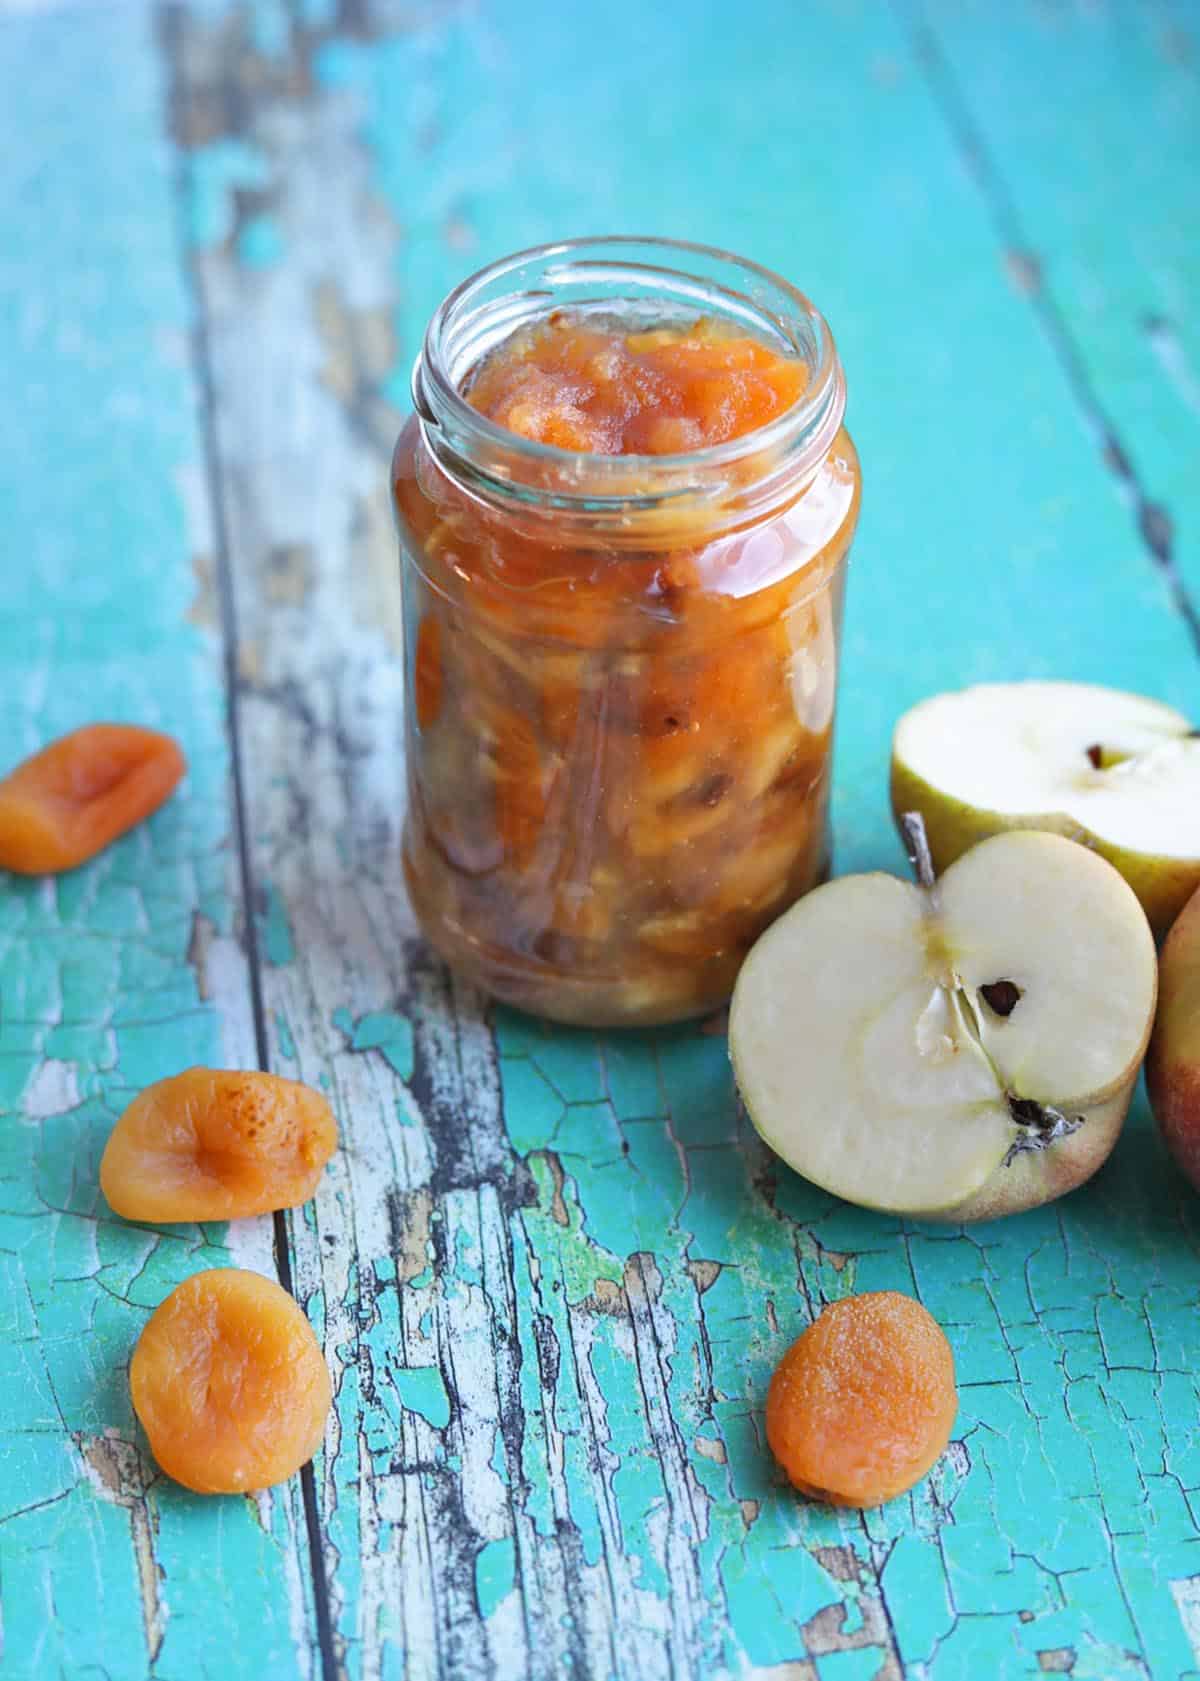 Apricot and Apple Chutney in jar with apples and dried apricot